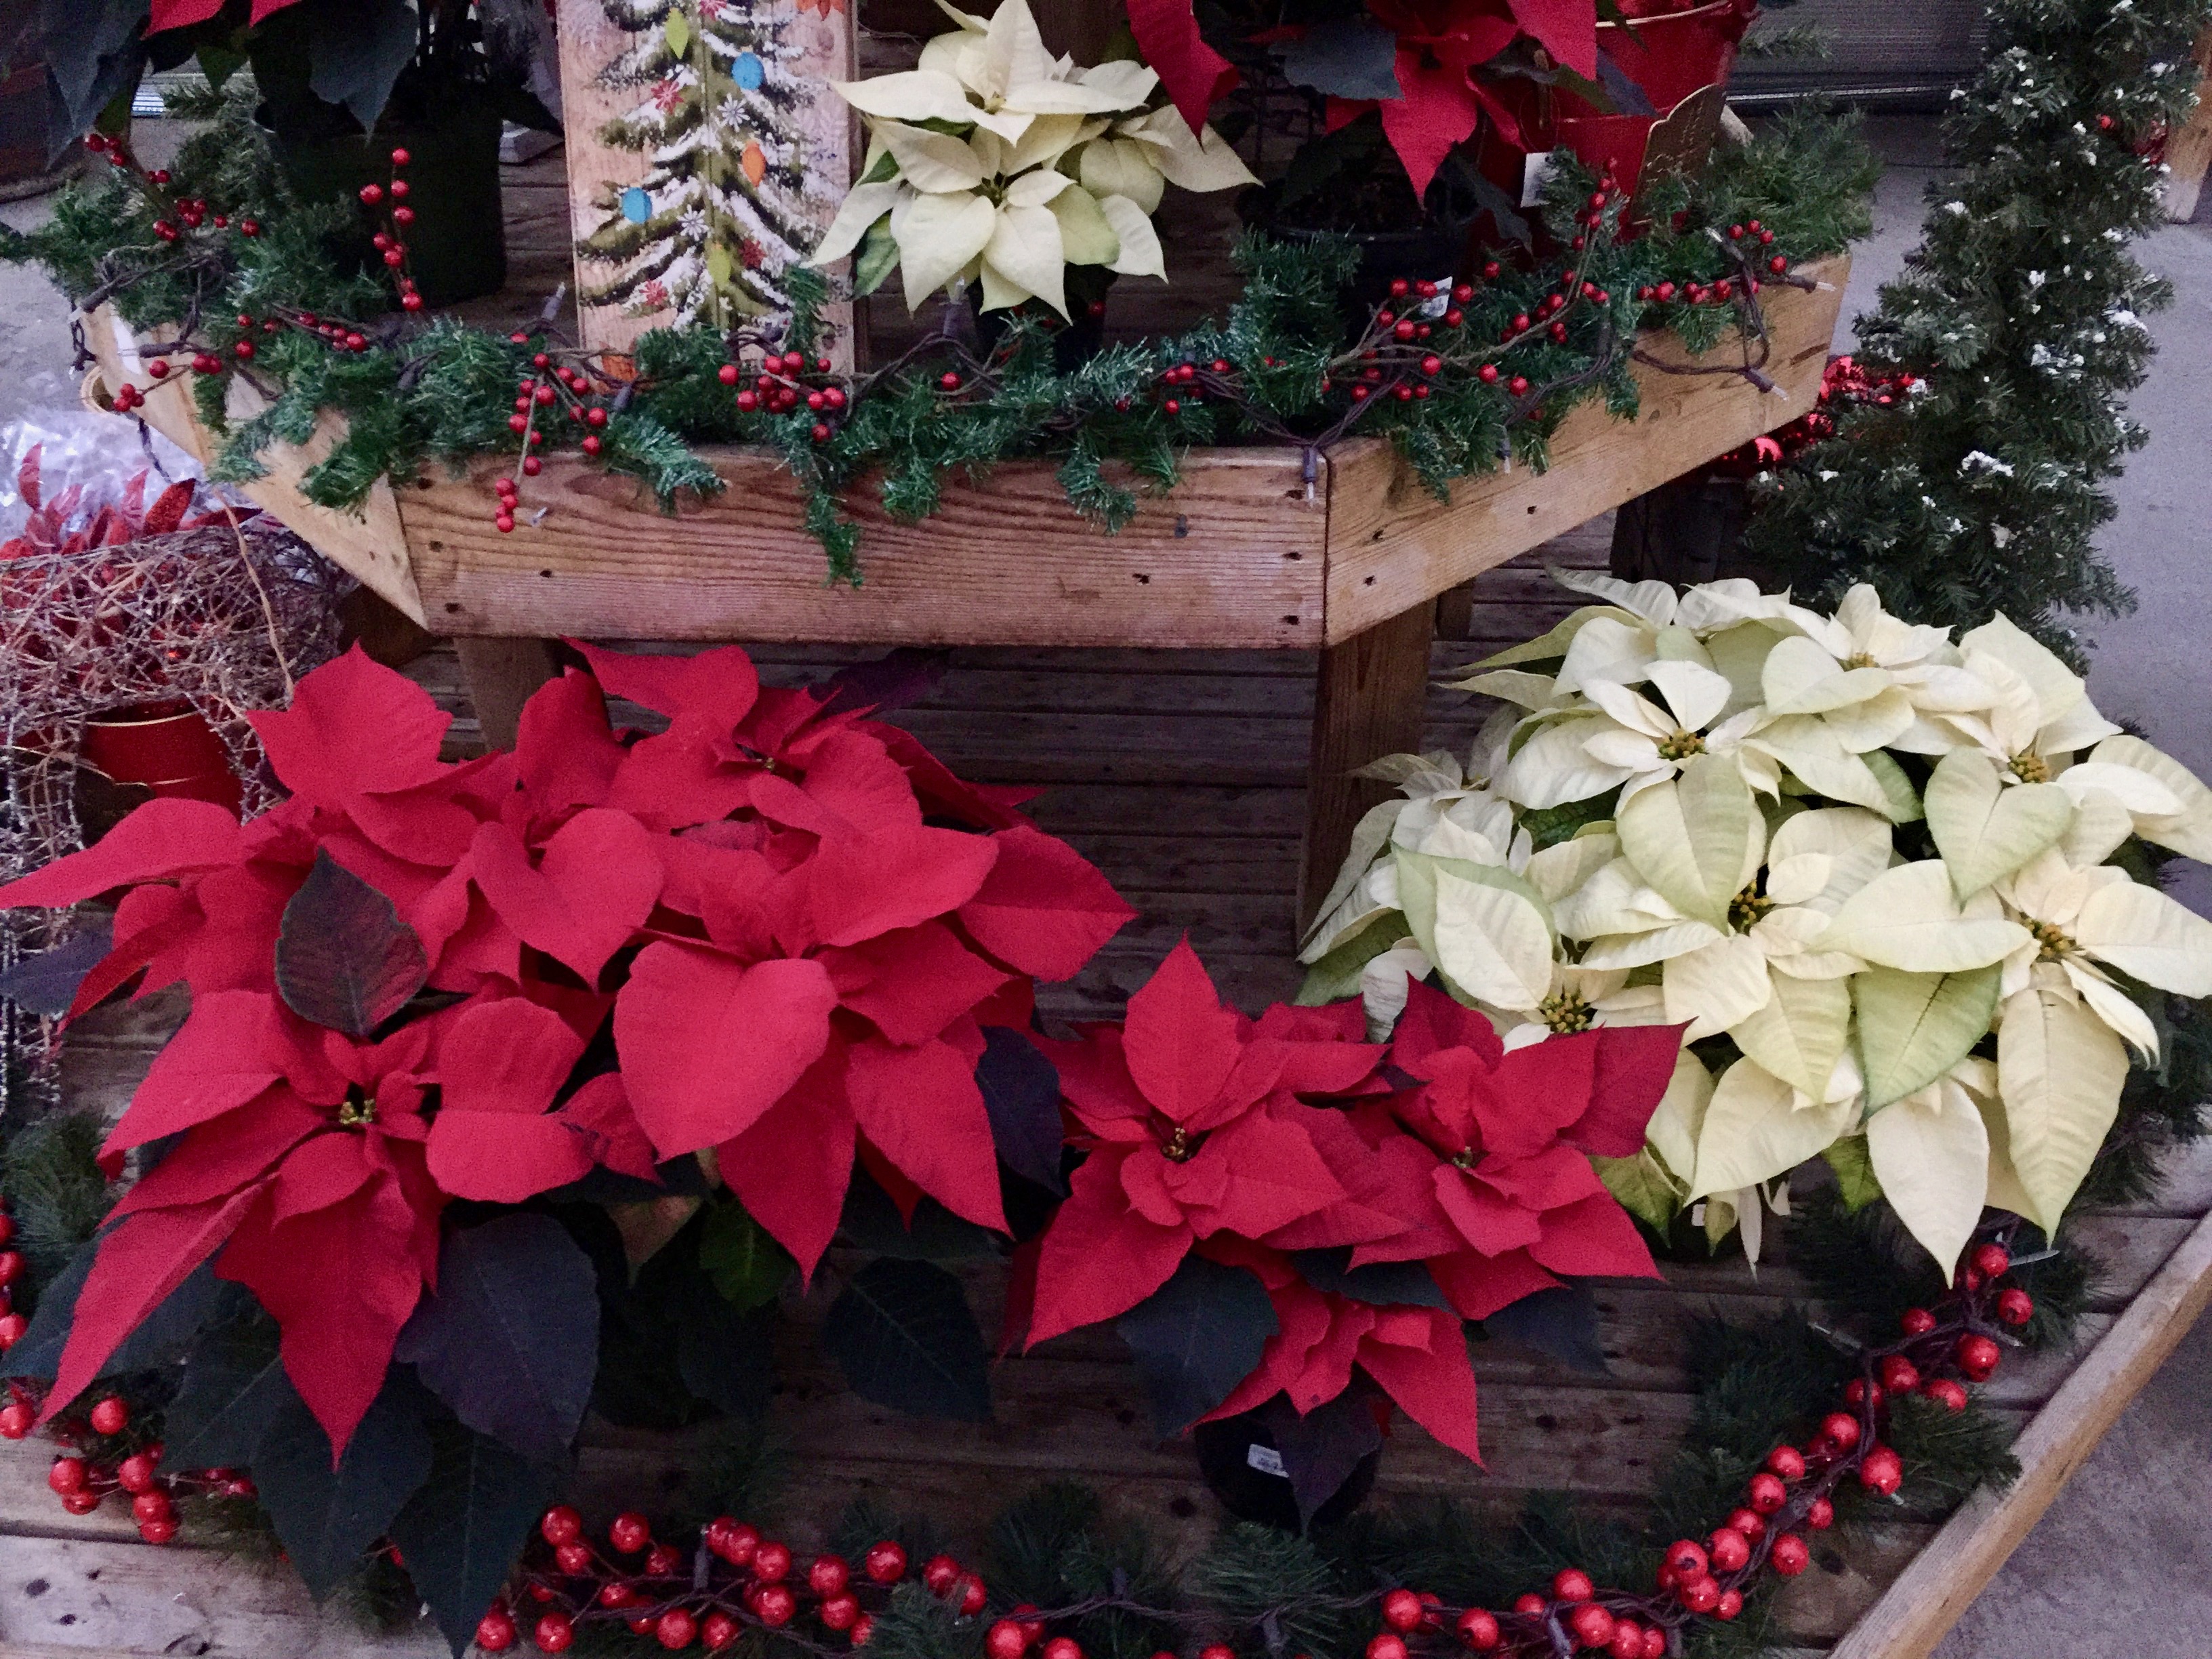 2018 Holiday Gift Giving Ideas, Poinsettias